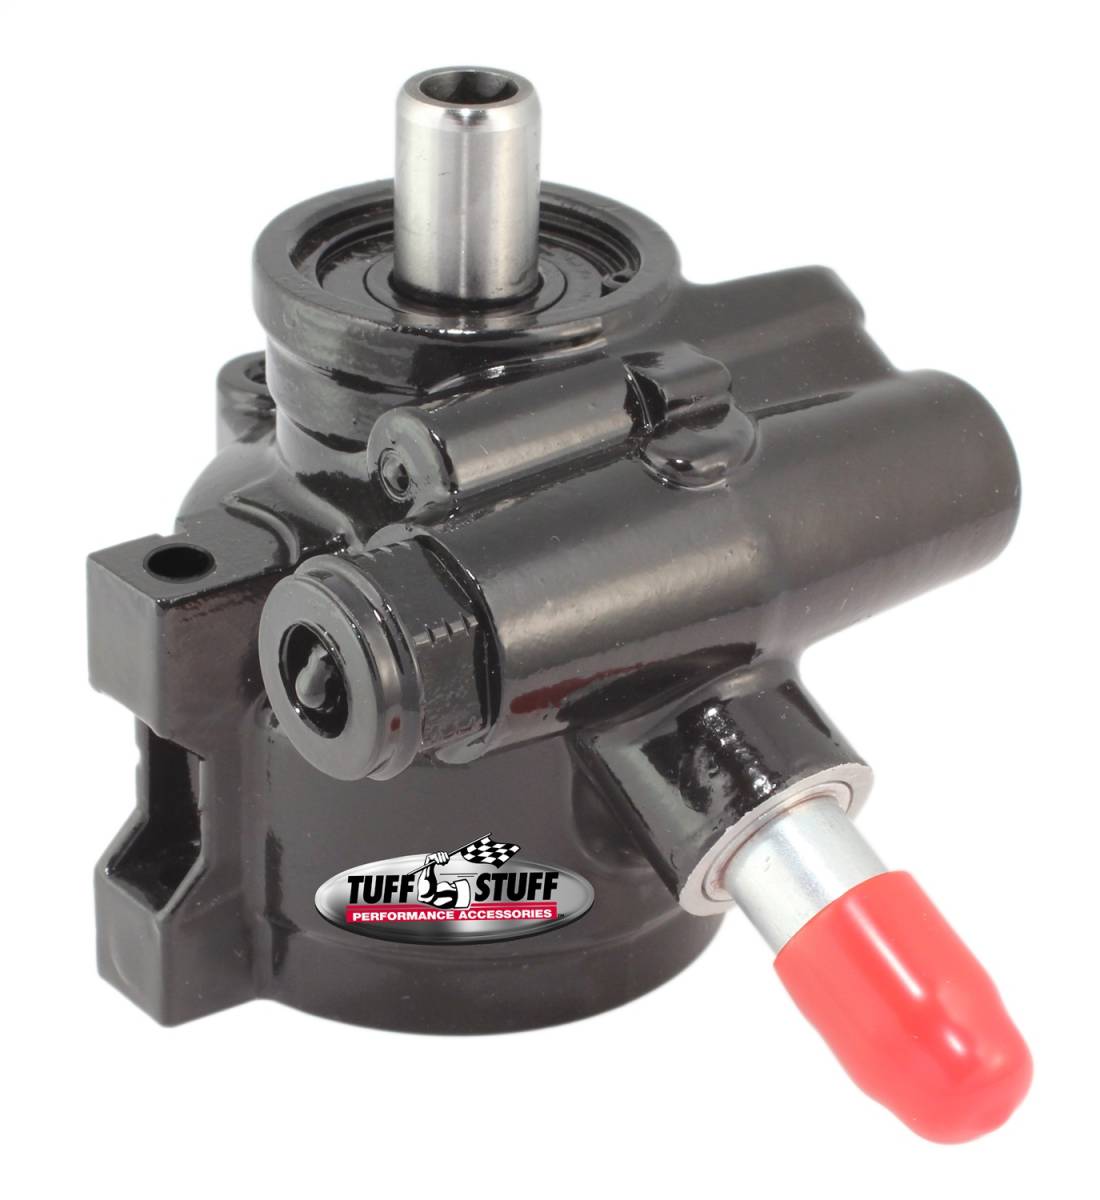 Tuff Stuff Performance - Type II Alum. Power Steering Pump M16 And 5/8 in. OD Return Tube 8mm Through Hole Mounting Btm Pressure Port For Street Rods/Custom Vehicles w/Limited Engine Space Black 6170ALB-3